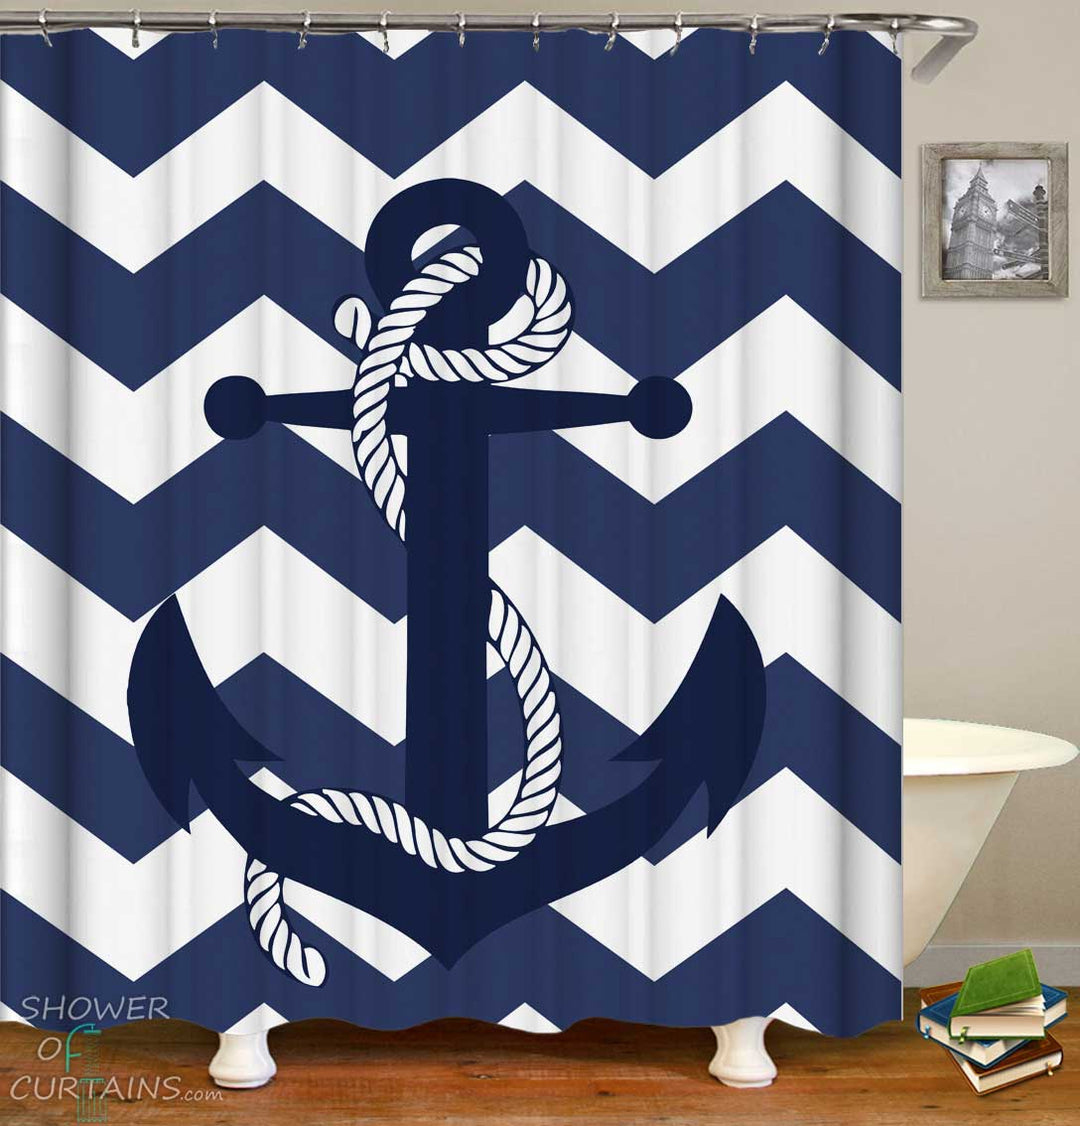 Shower Curtains with Blue Anchor and Chevron